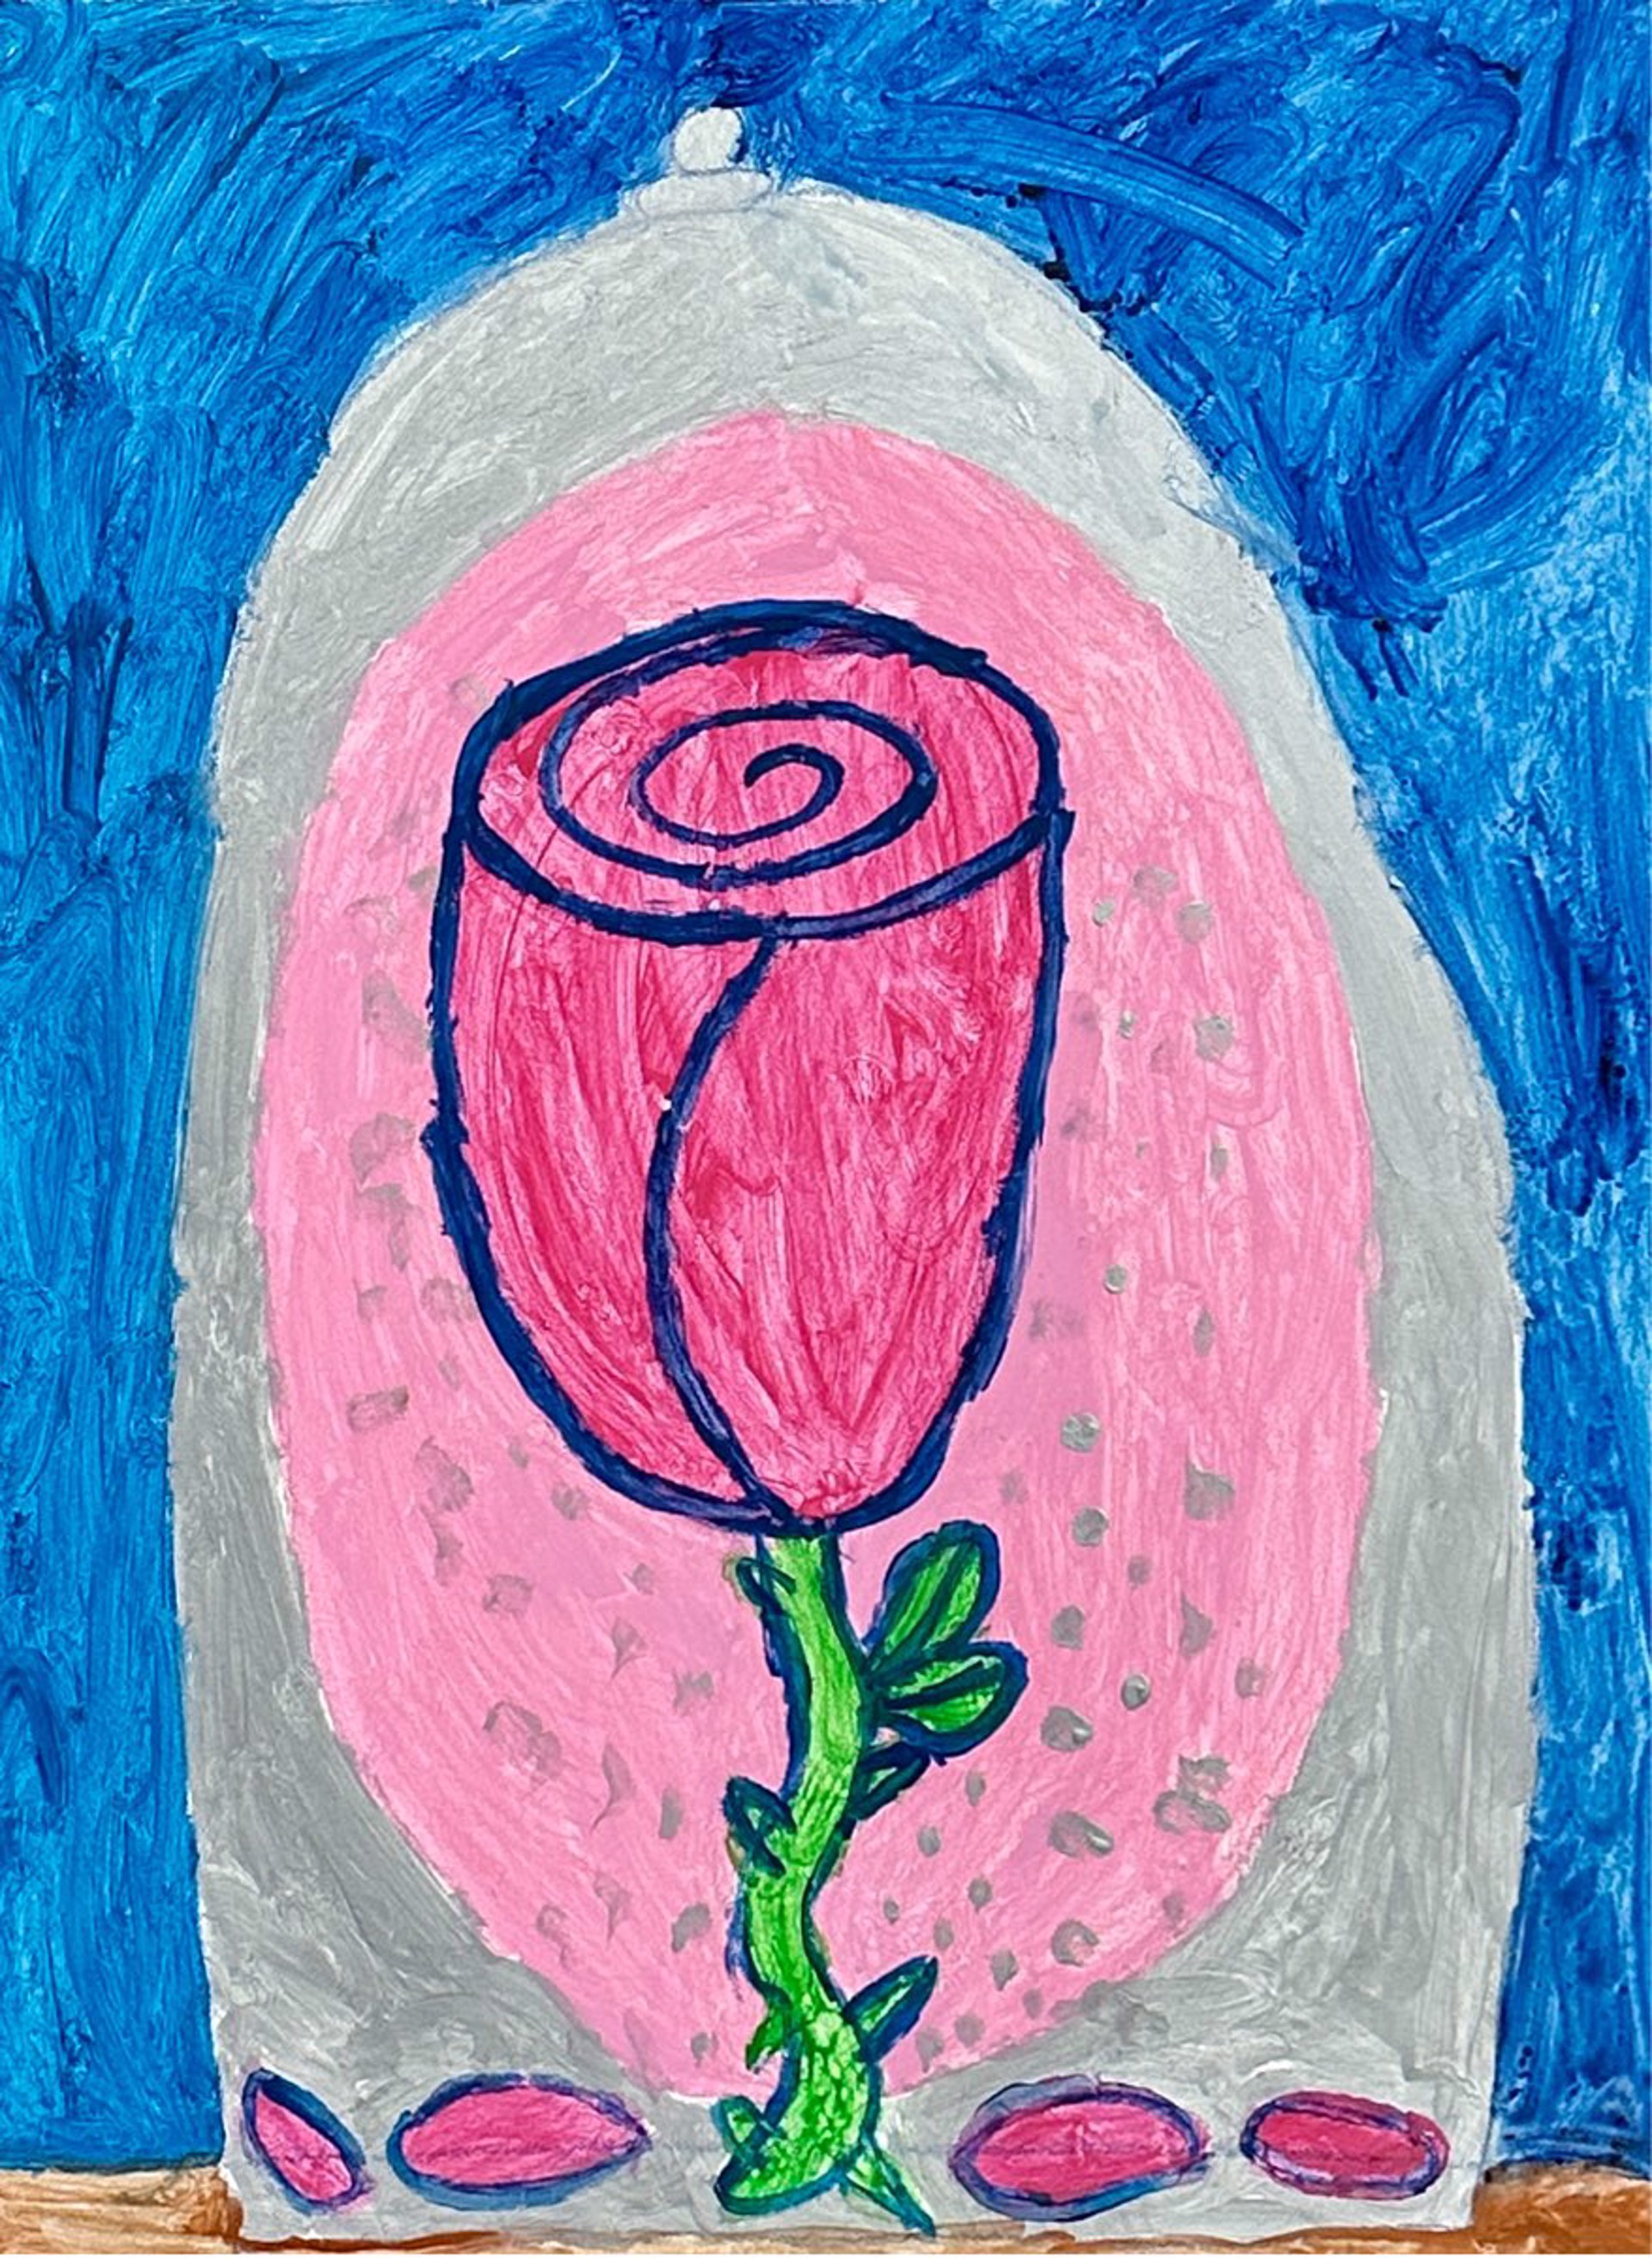 "The Rose" by Lauren EAS by Autism Academy